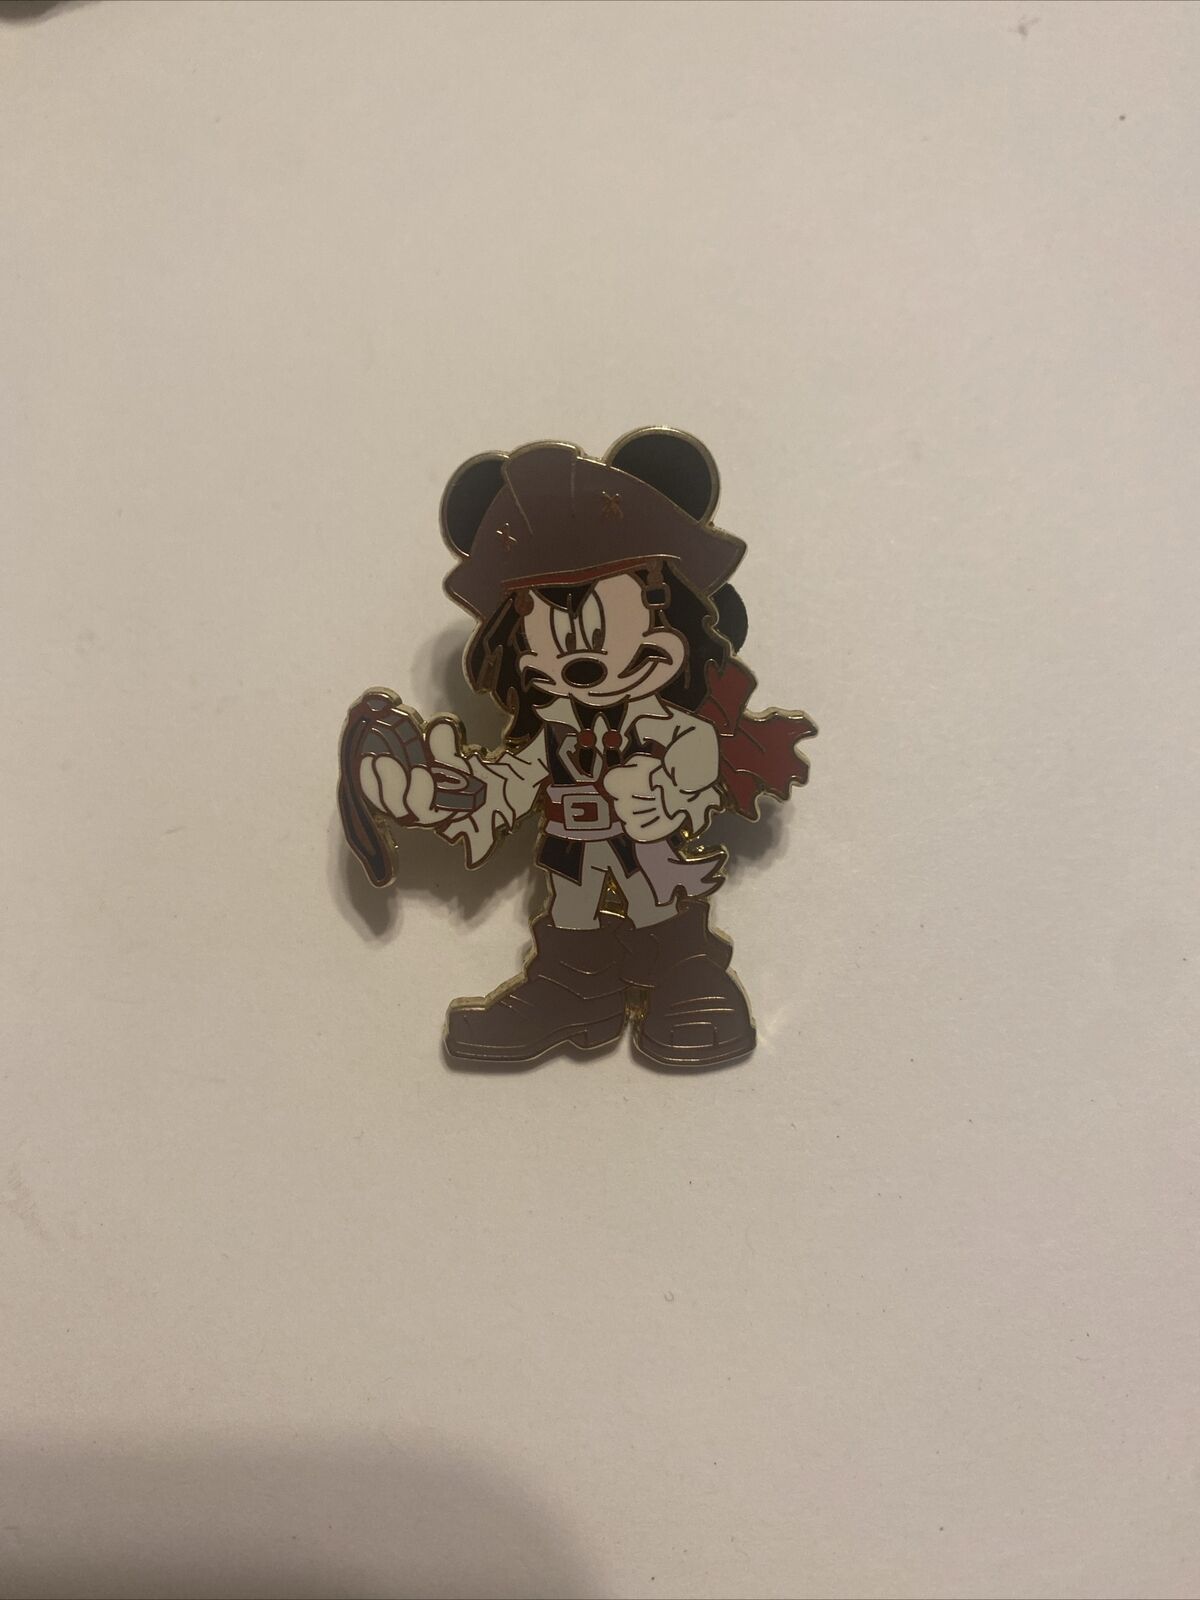 DISNEY WDW 2009 PIRATES OF THE CARIBBEAN MICKEY MOUSE AS JACK SPARROW PIN